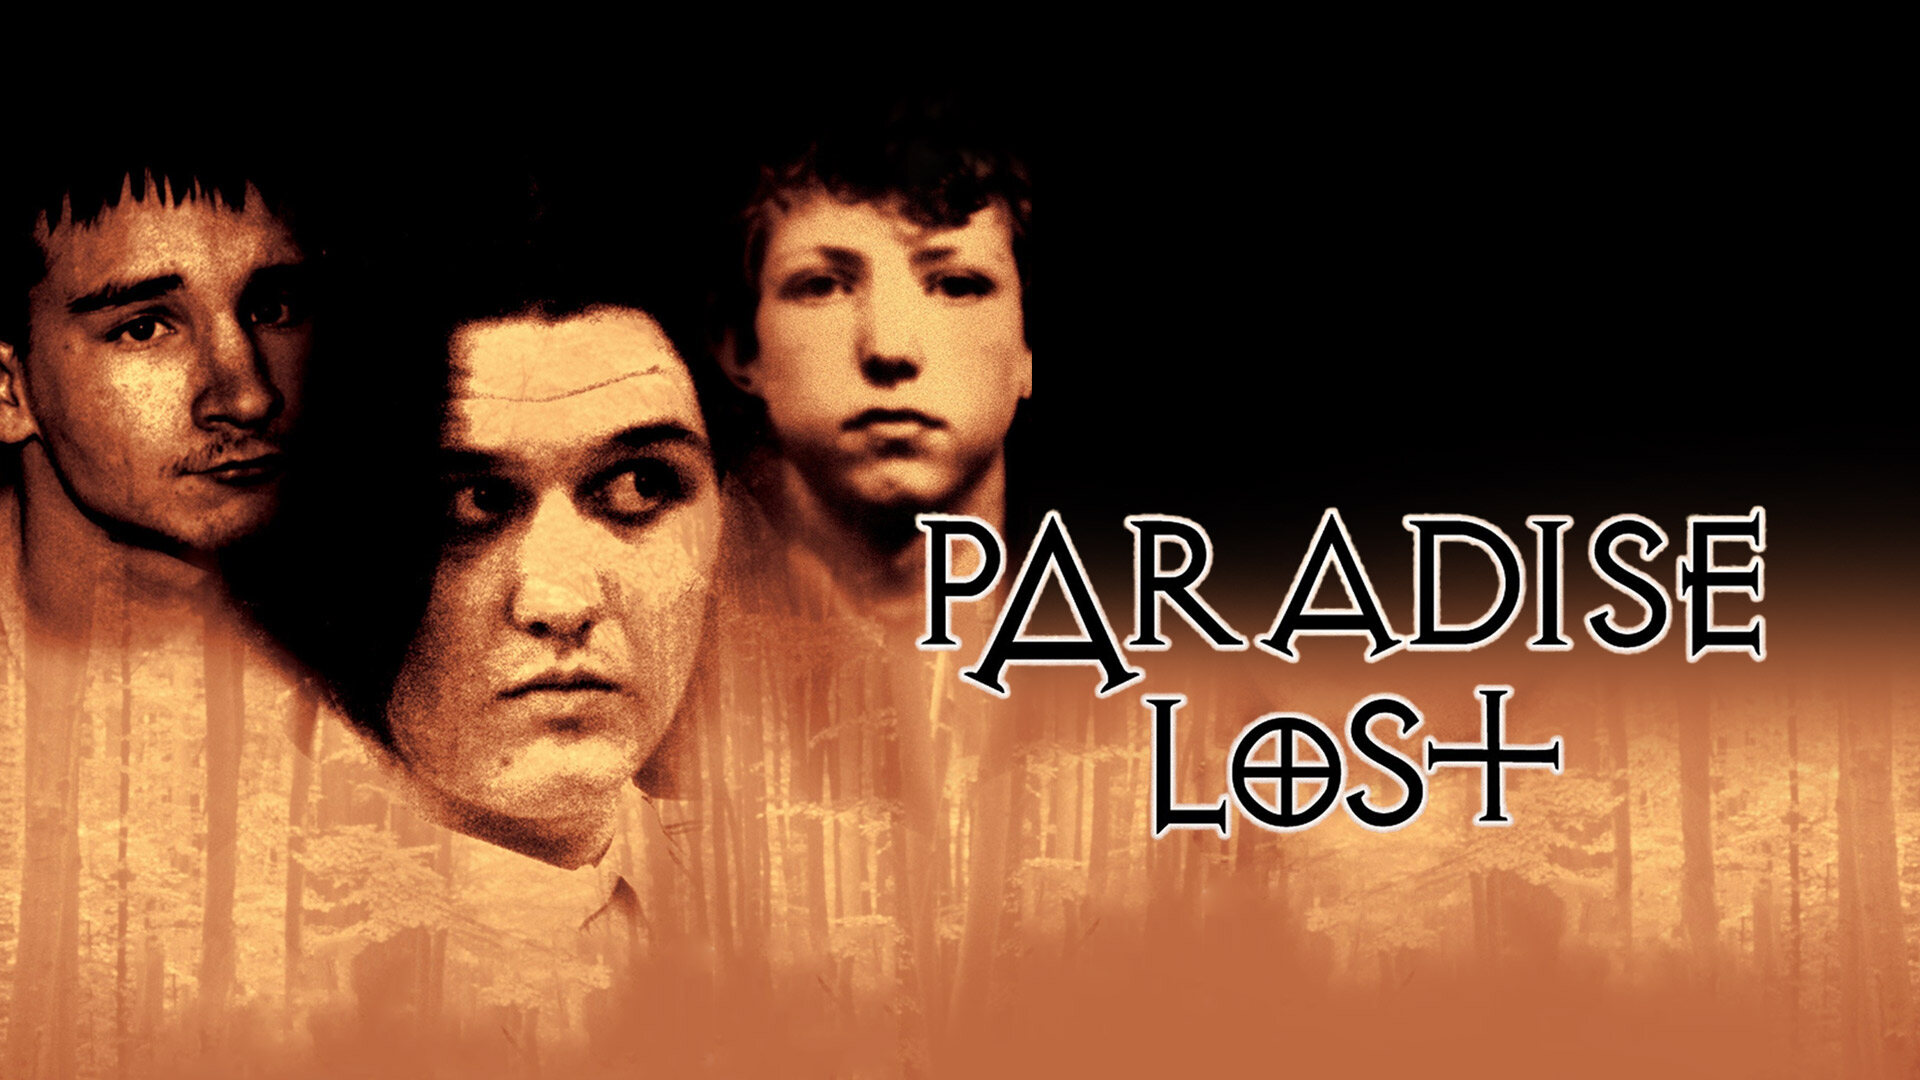 33-facts-about-the-movie-paradise-lost-2-revelations